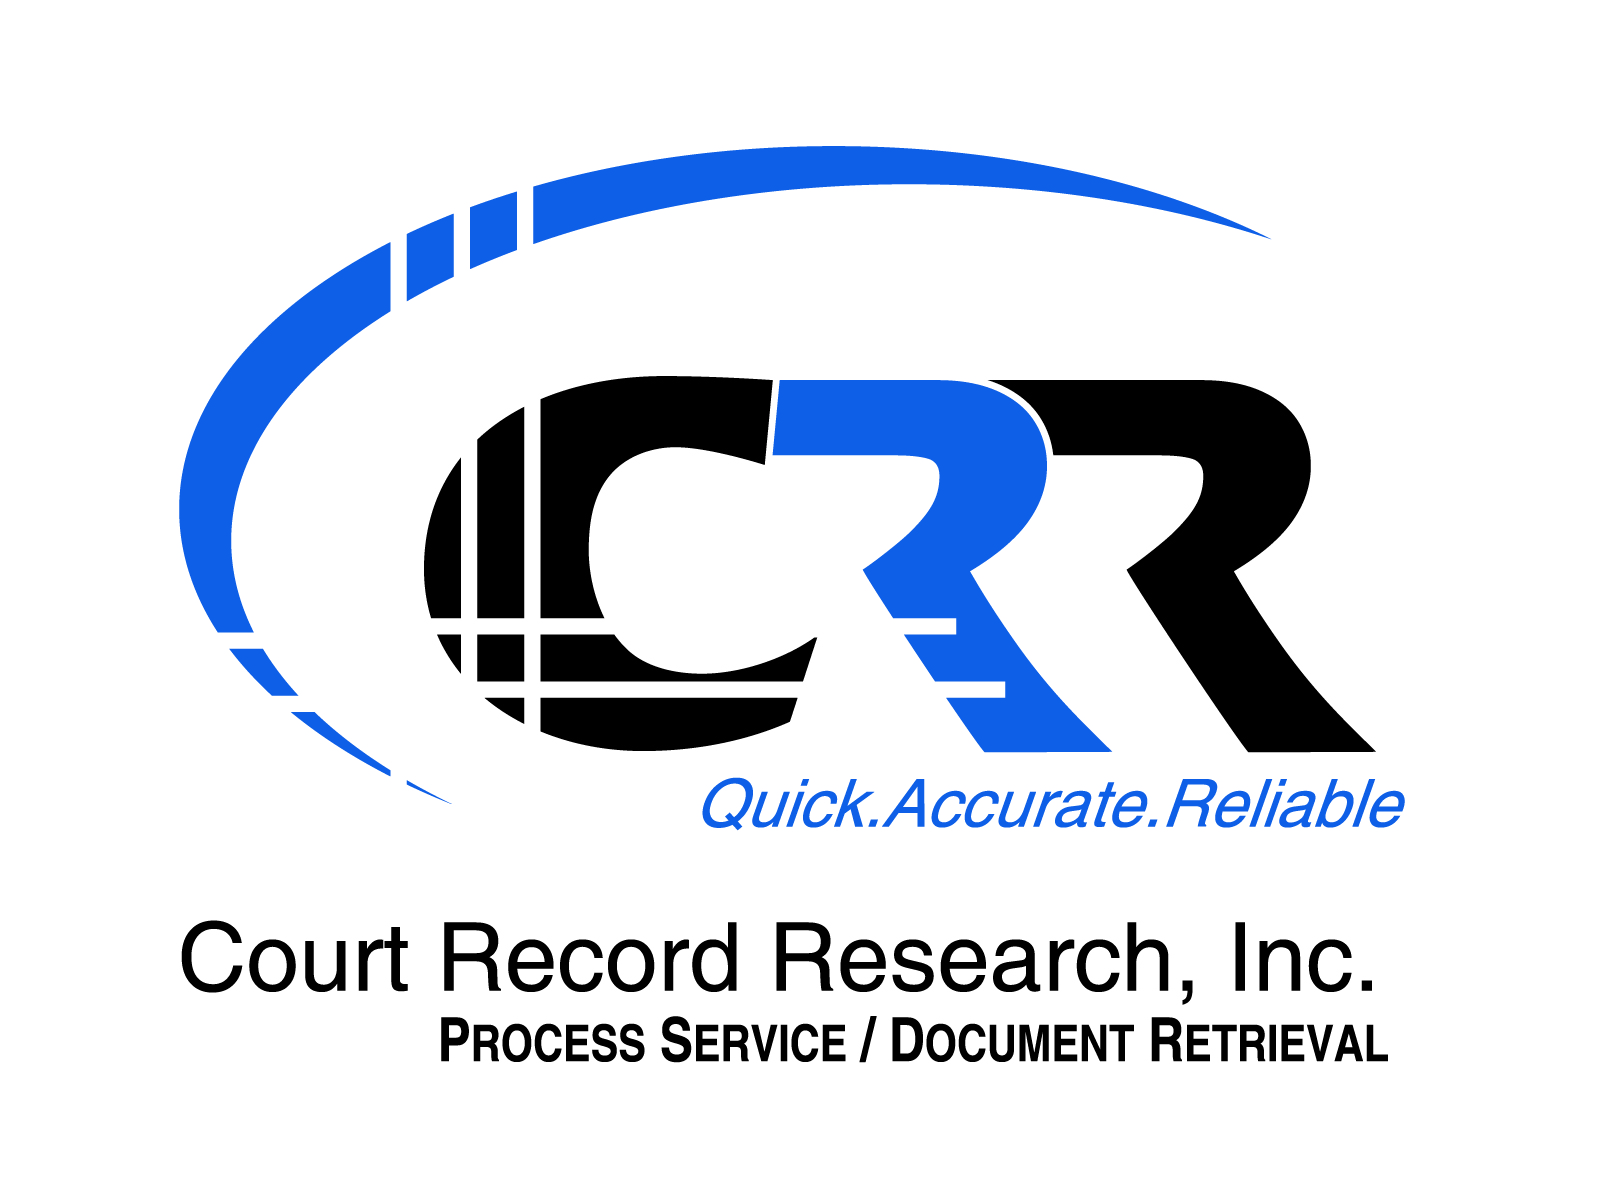 Court Record Research, Inc.